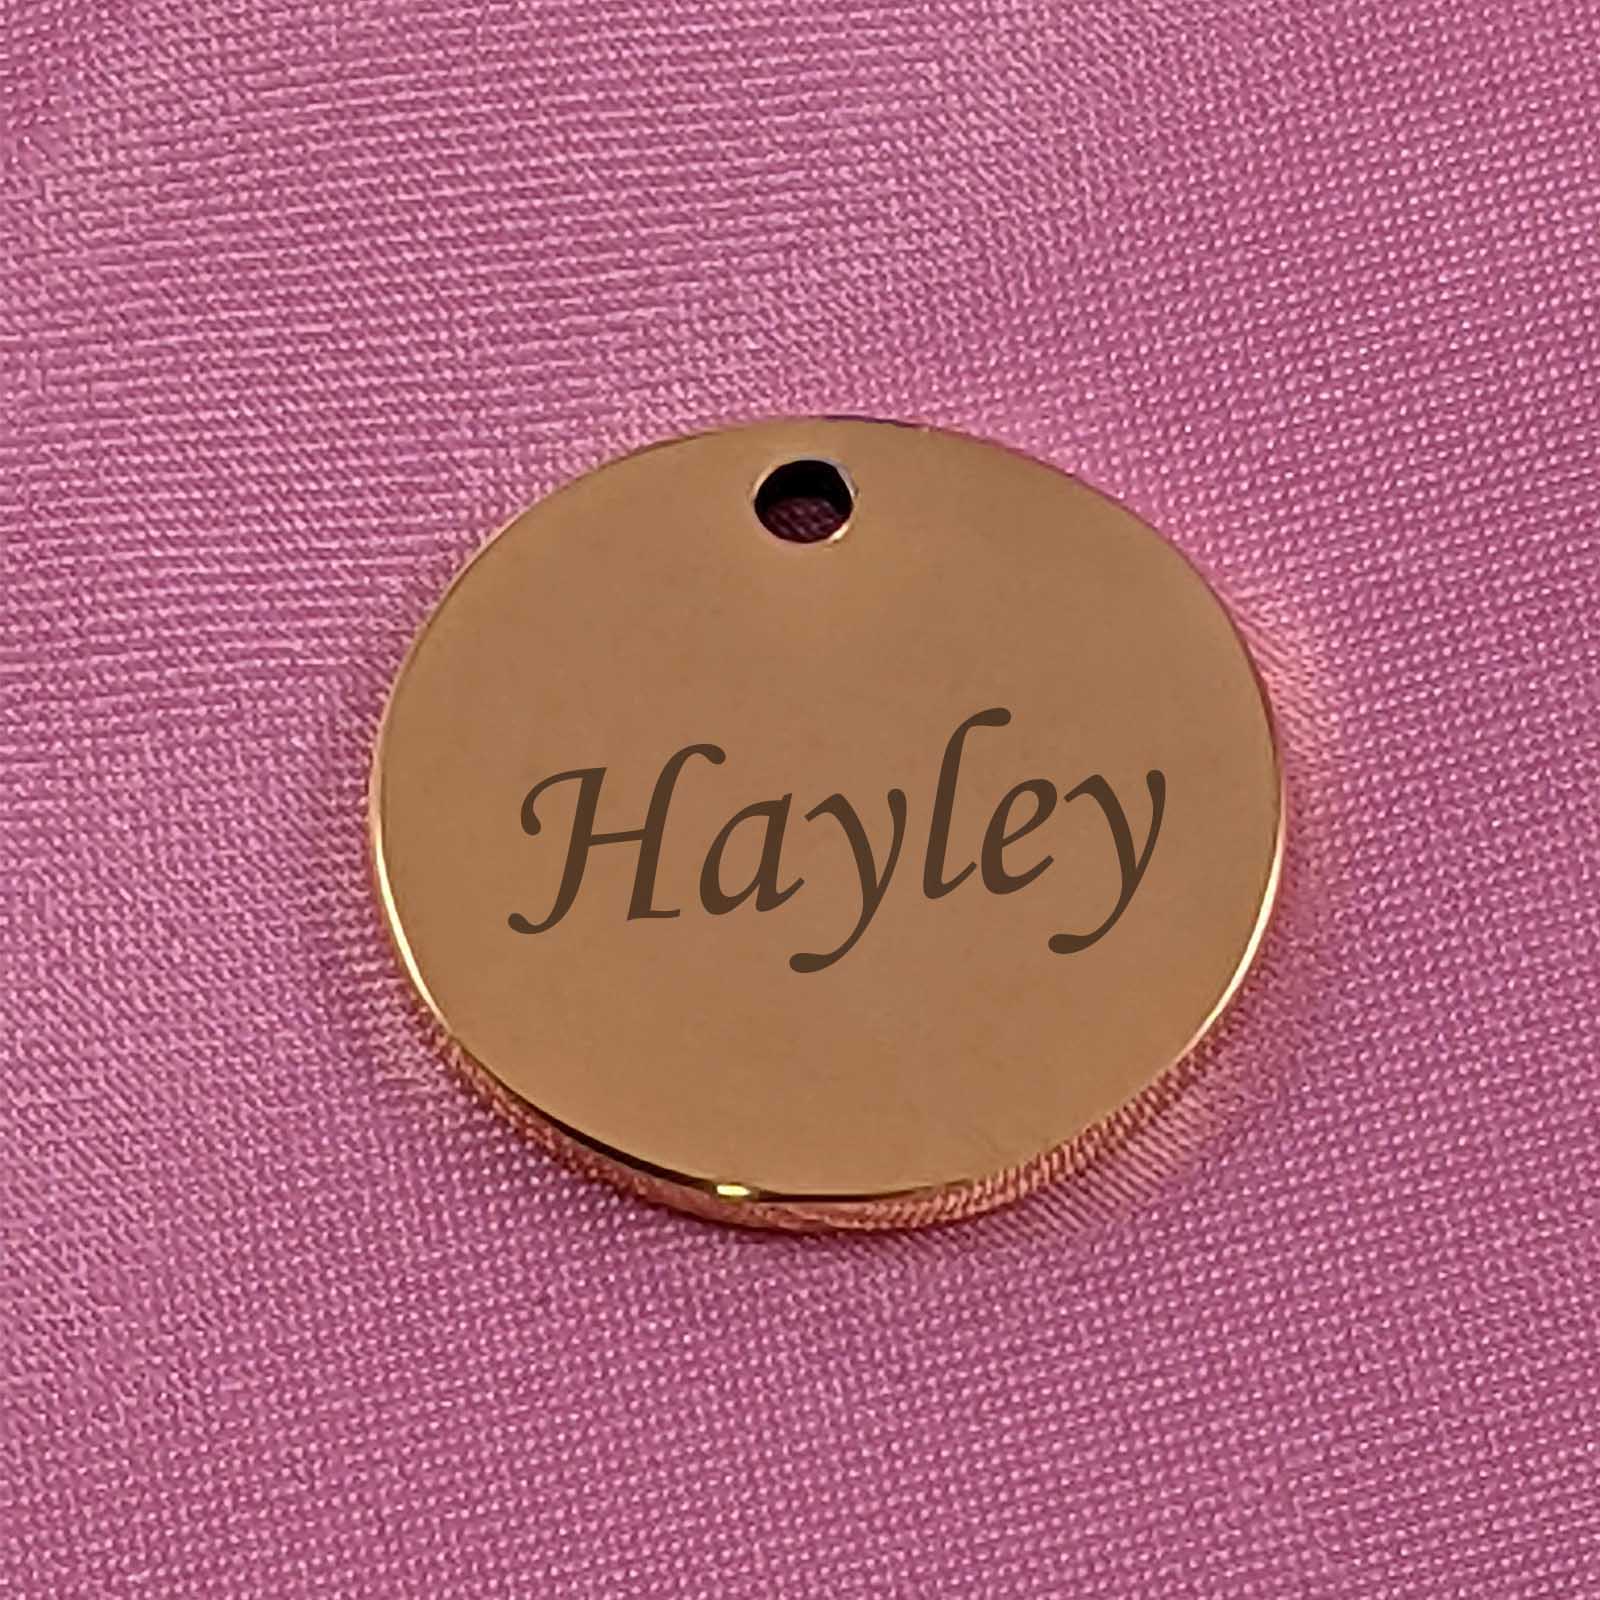 Personalised Disc Charm